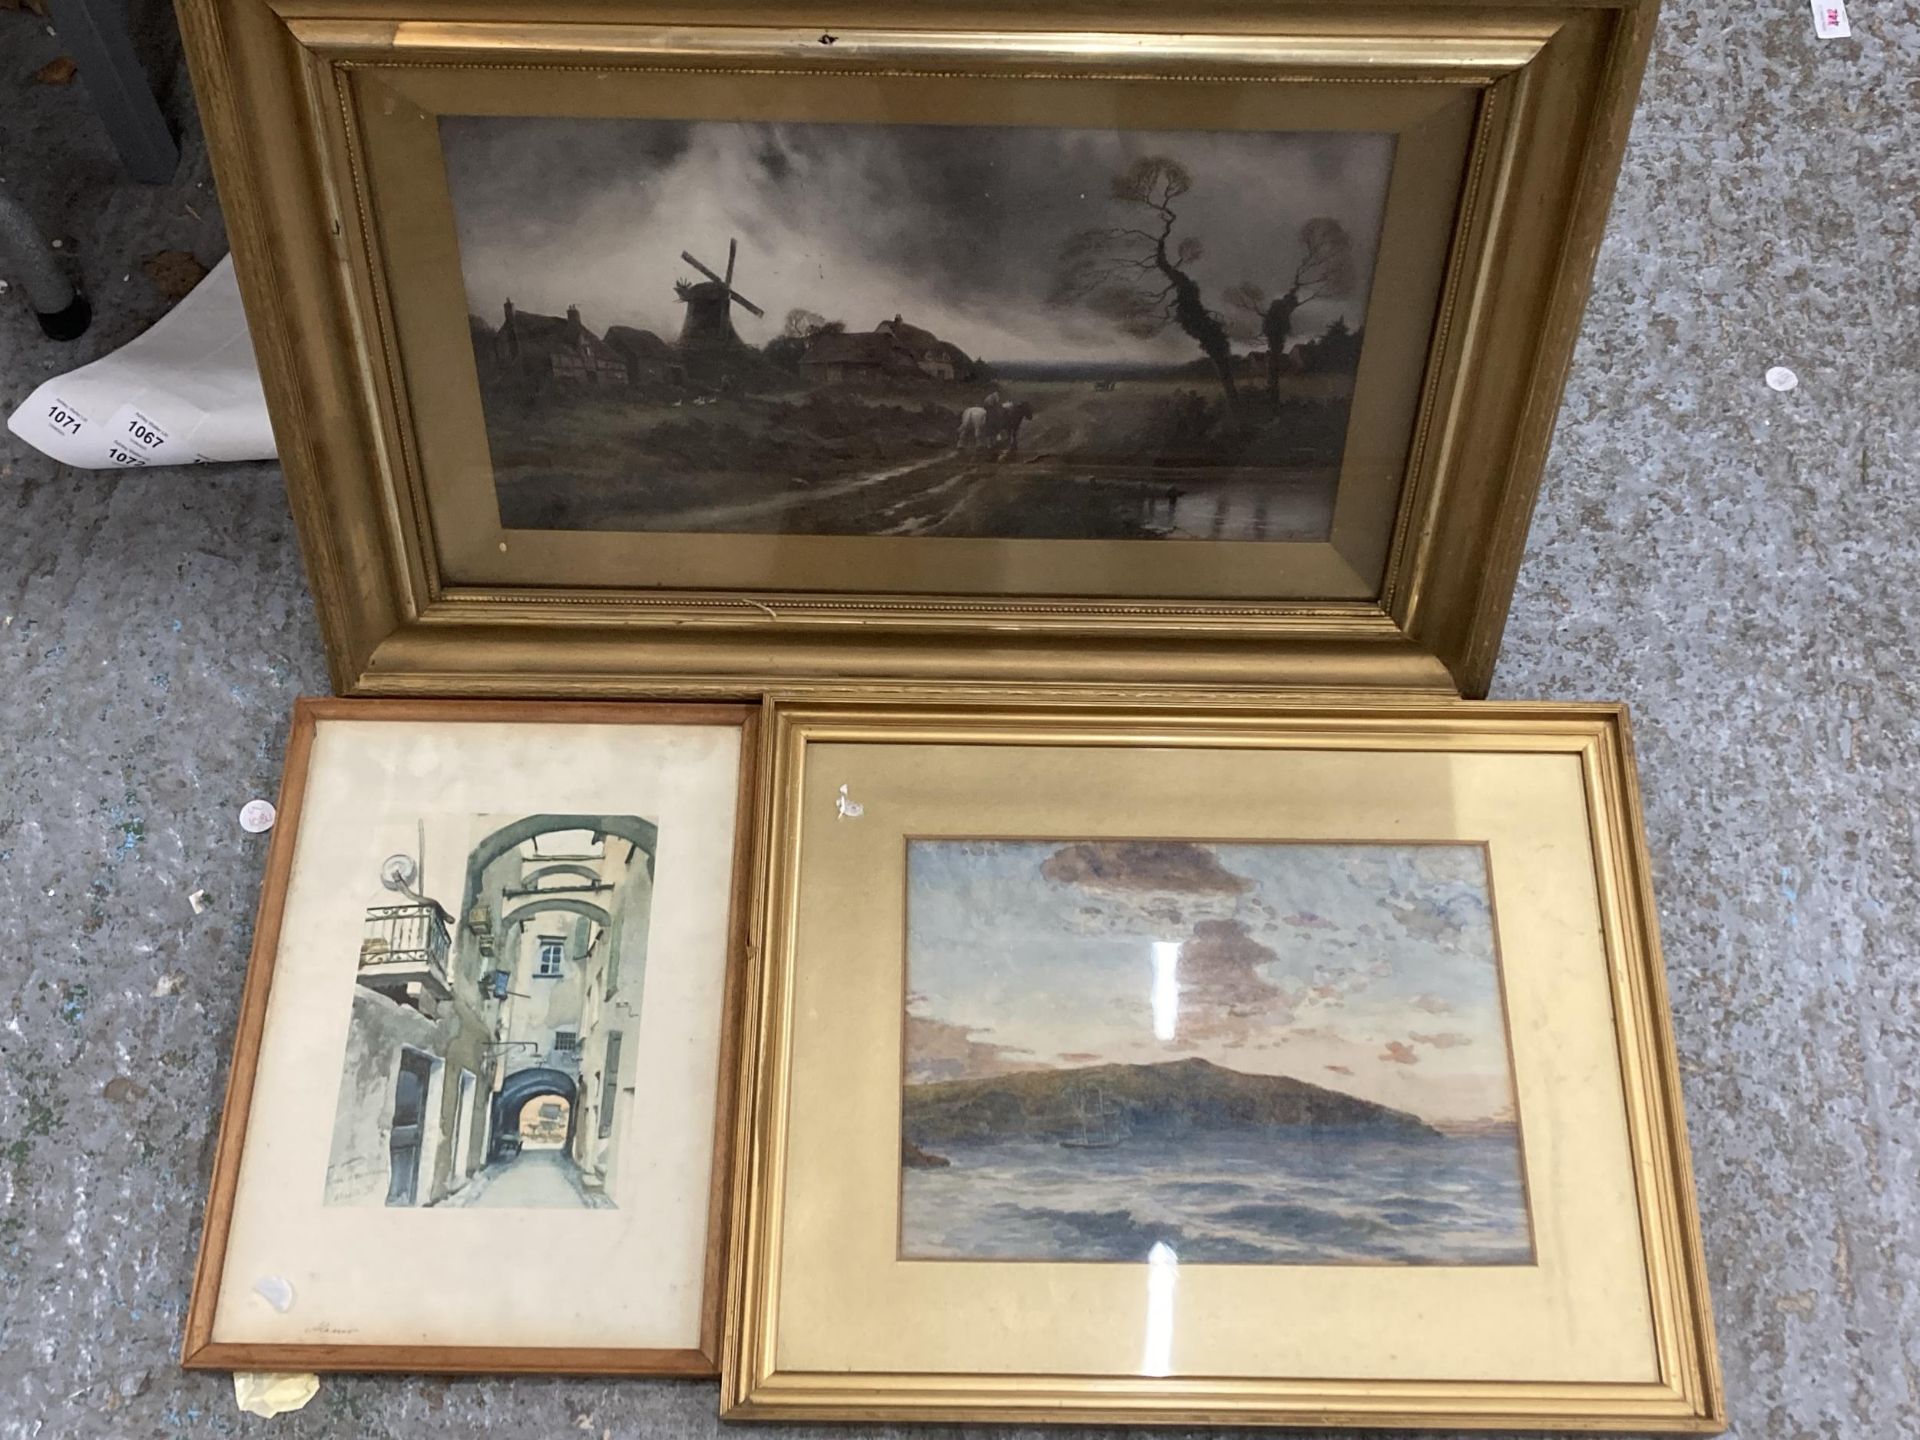 THREE FRAMED PAINTINGS - WATERCOLOUR OF A WINDMILL, STREET SCENE AND FURTHER EXAMPLE